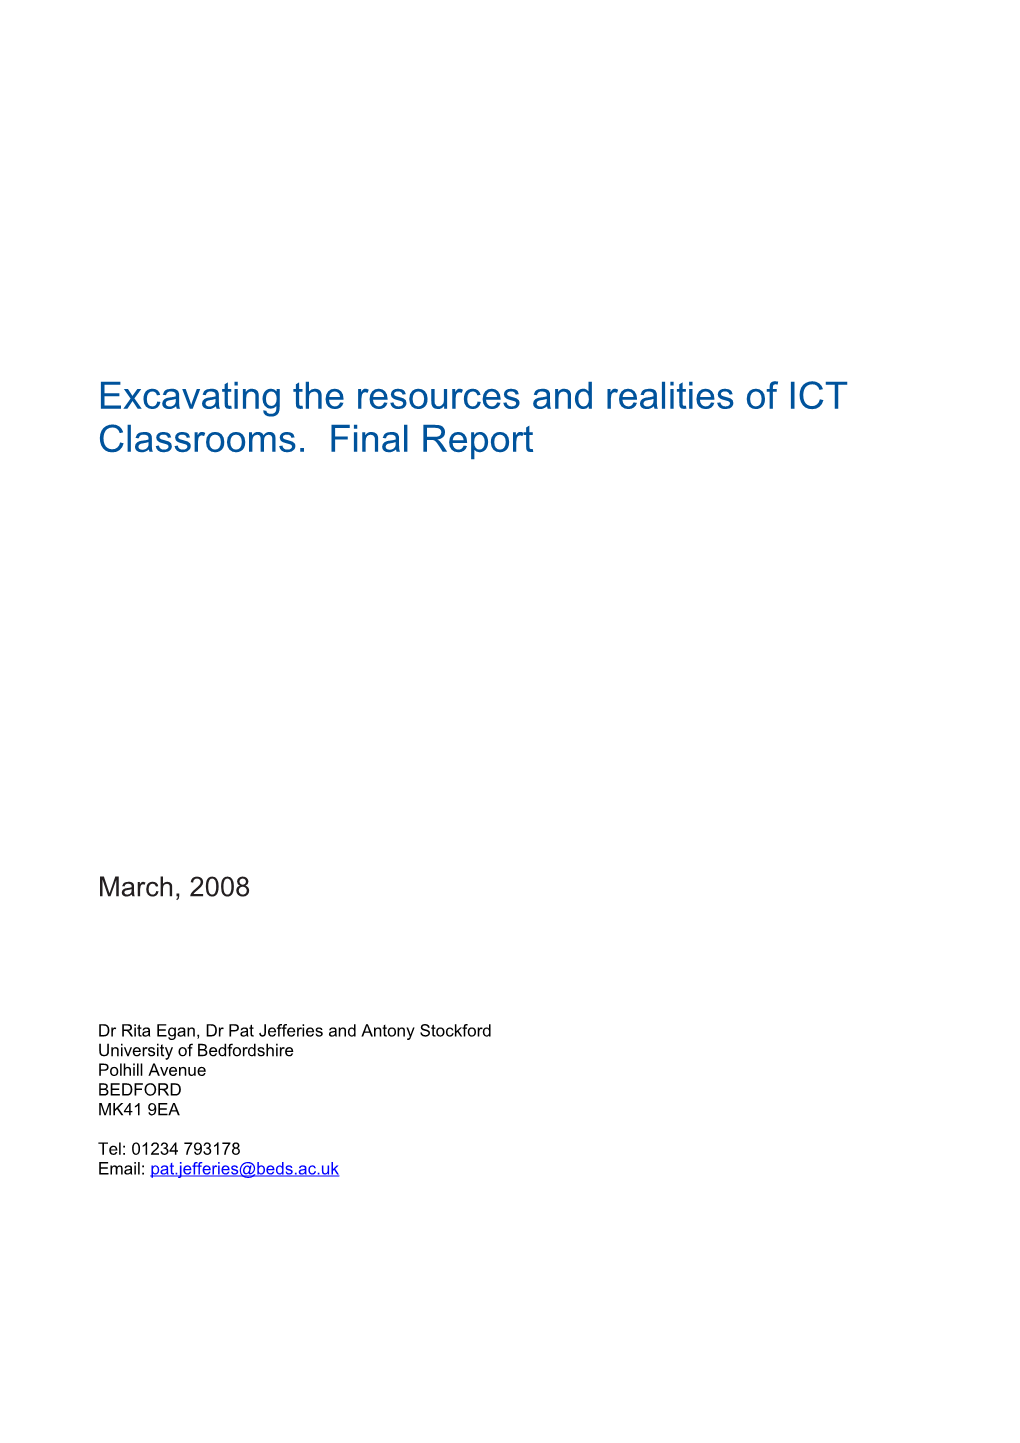 Excavating the Resources and Realities of ICT Classrooms